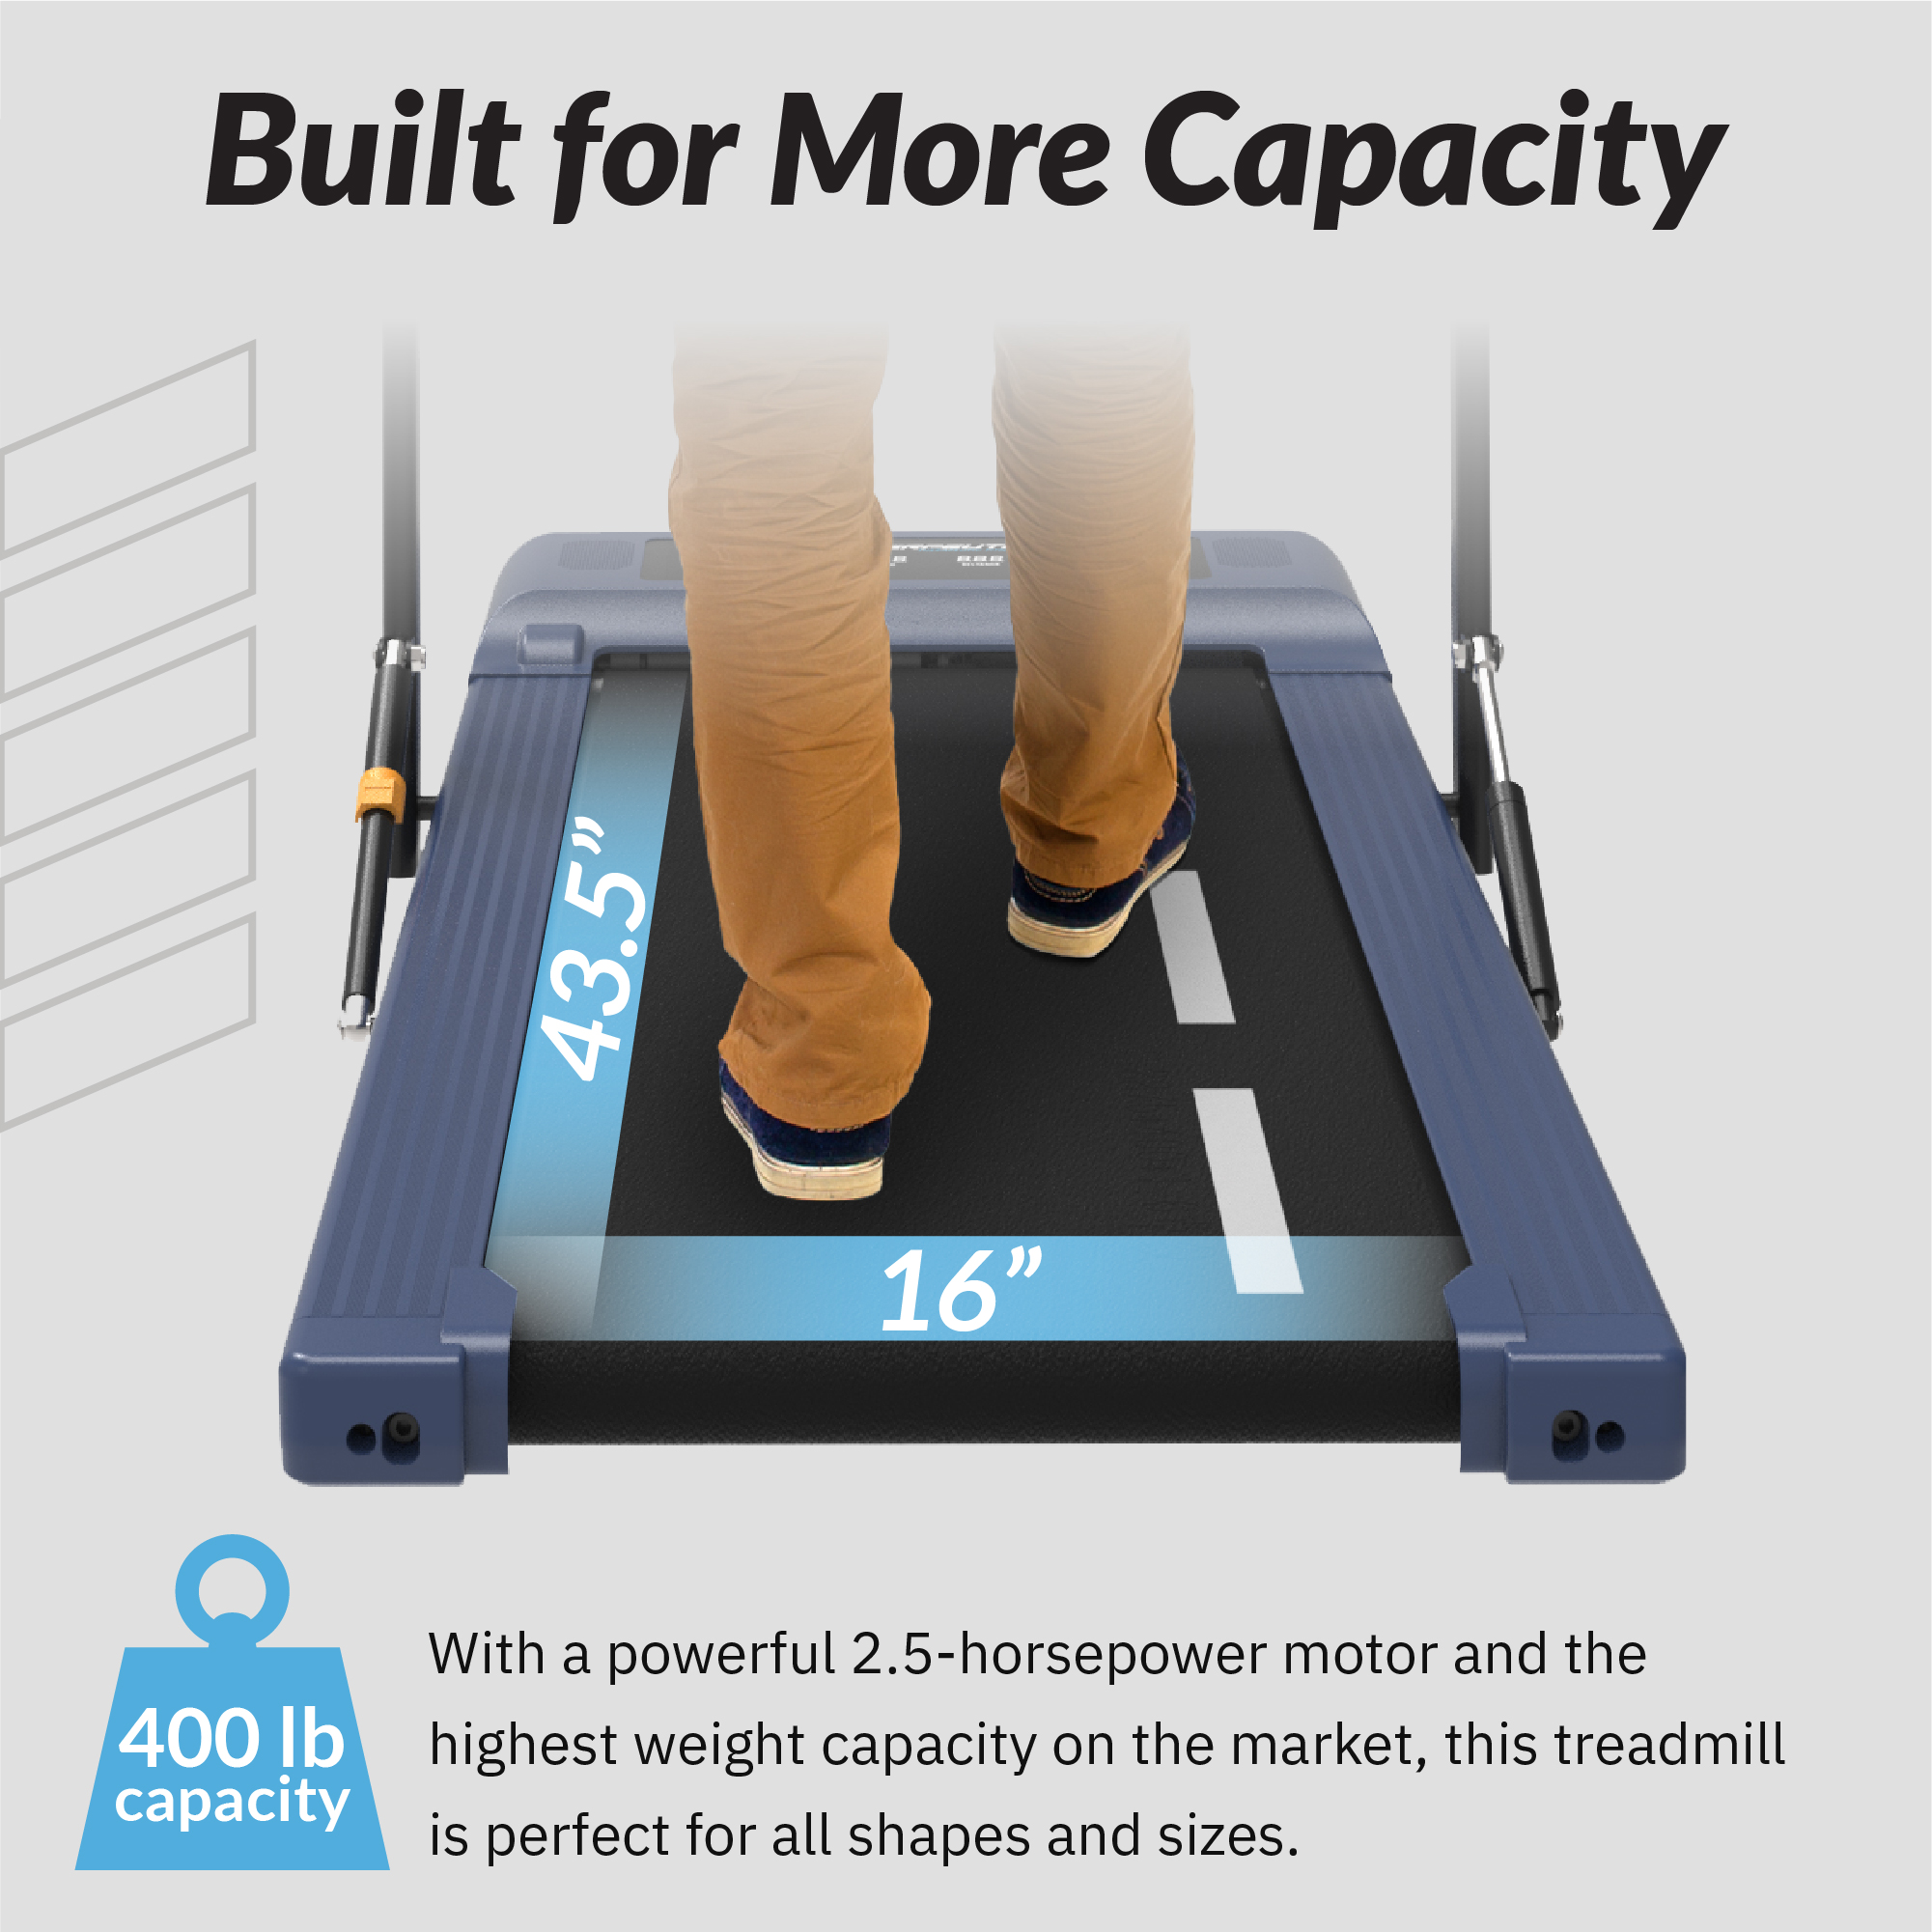 Exerpeutic TF1000 400 lbs. Weight Capacity Treadmill with Incline Options, Heavy Duty Belt and Pulse Monitoring - image 3 of 7